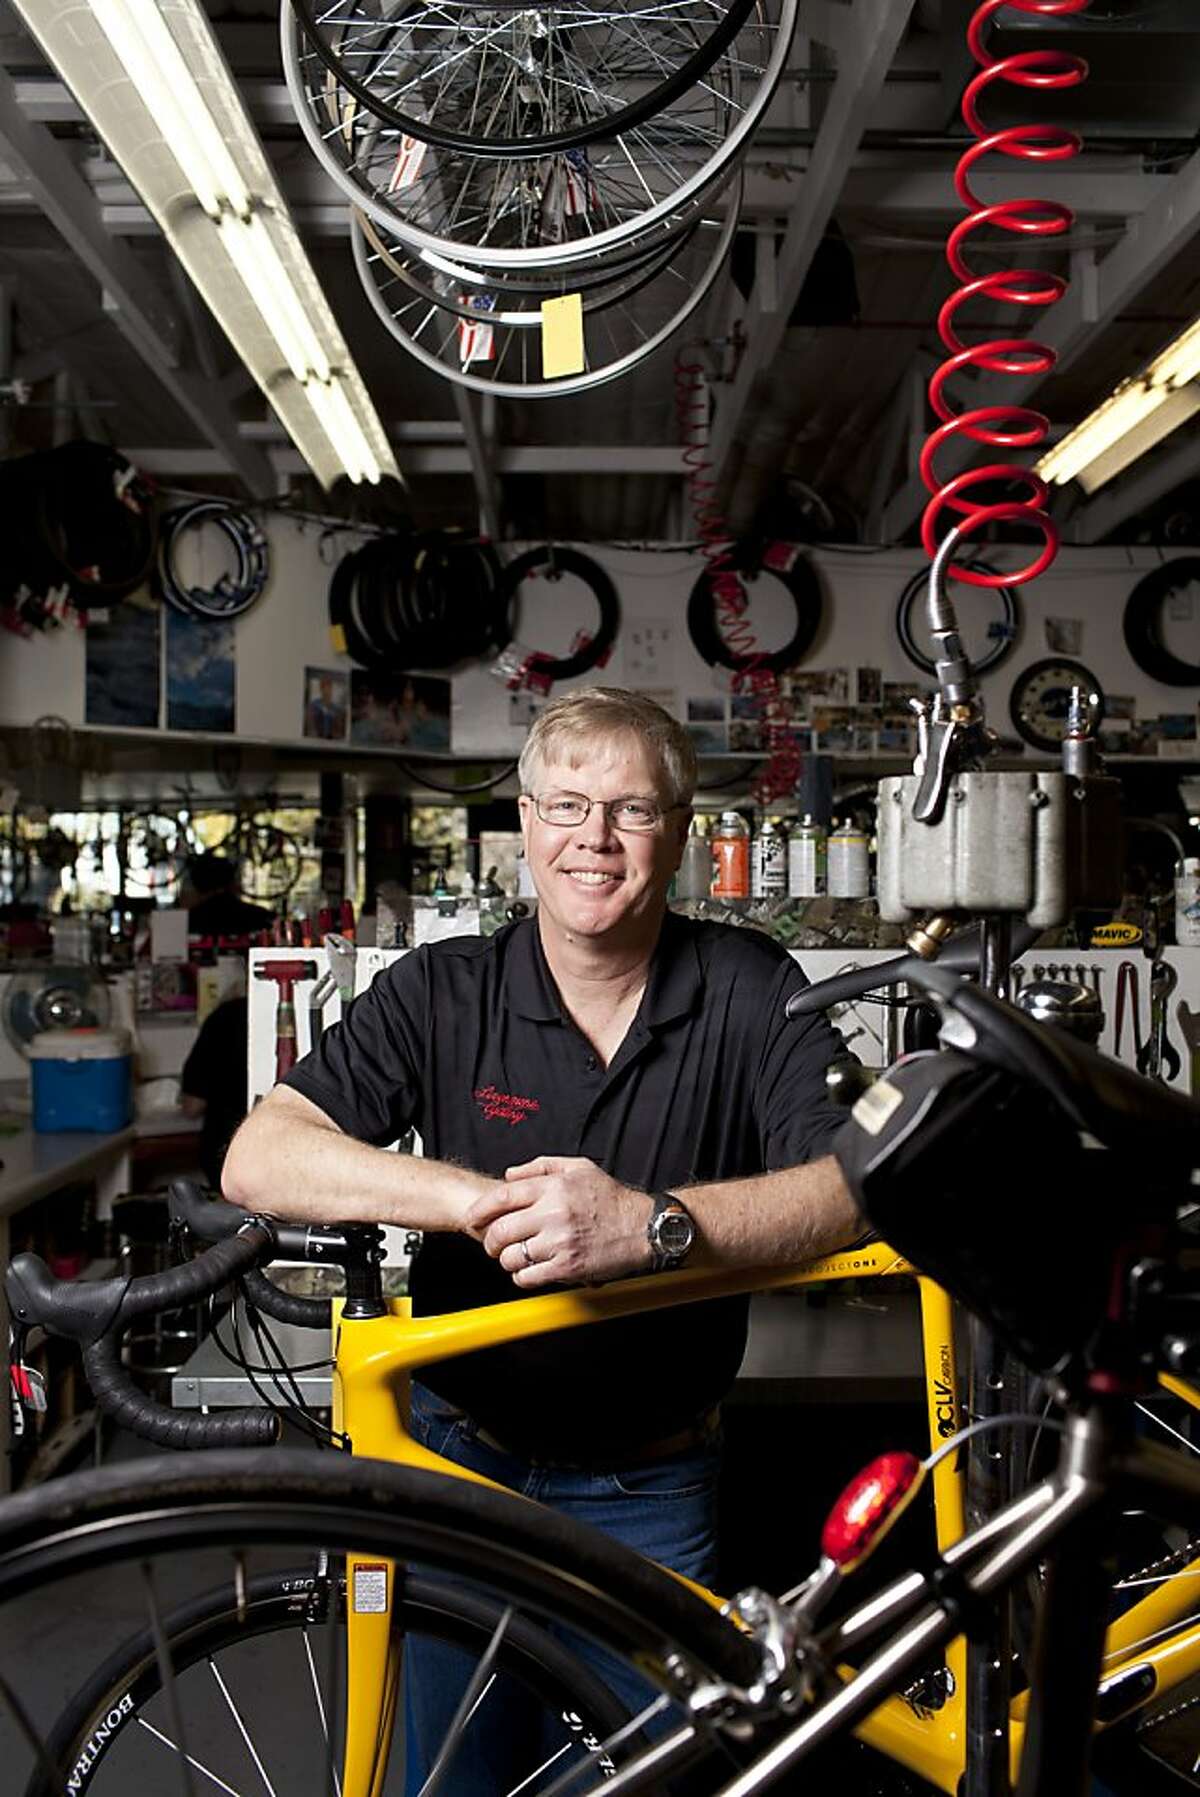 Steve Howard of Livermore Cyclery in Livermore, Calif., Monday, February 25, 2013.